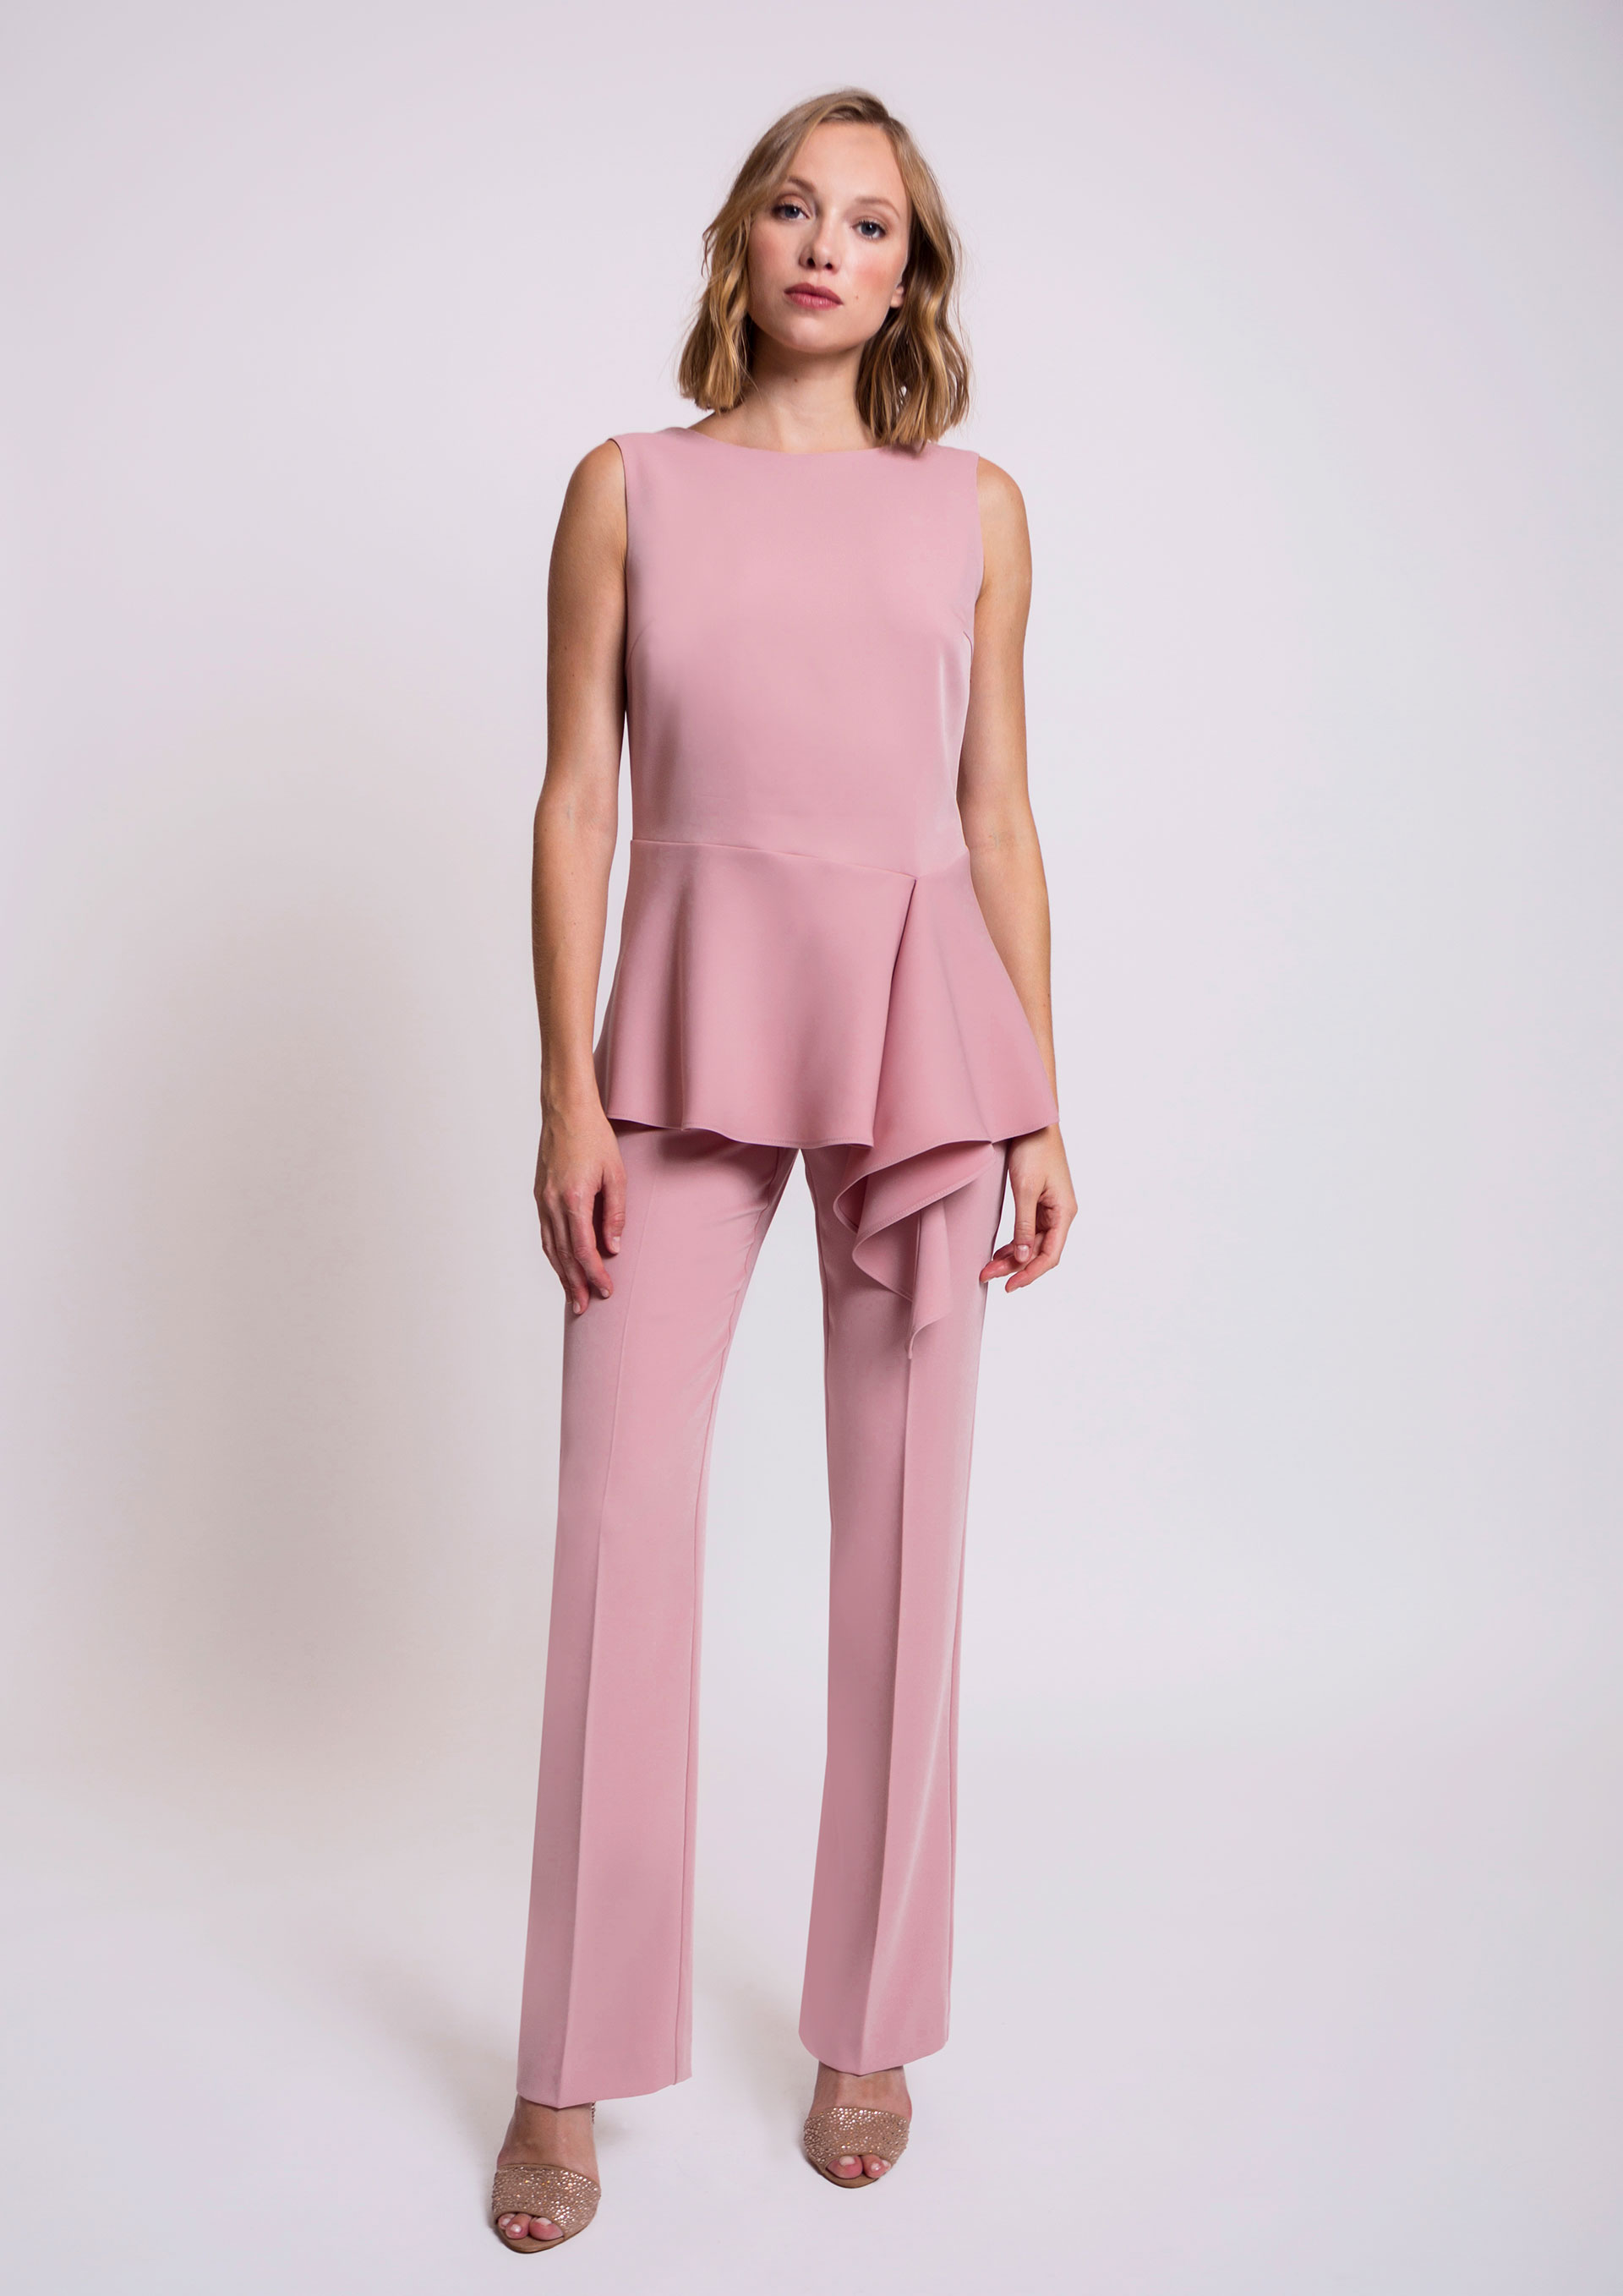 Pale pink trousers